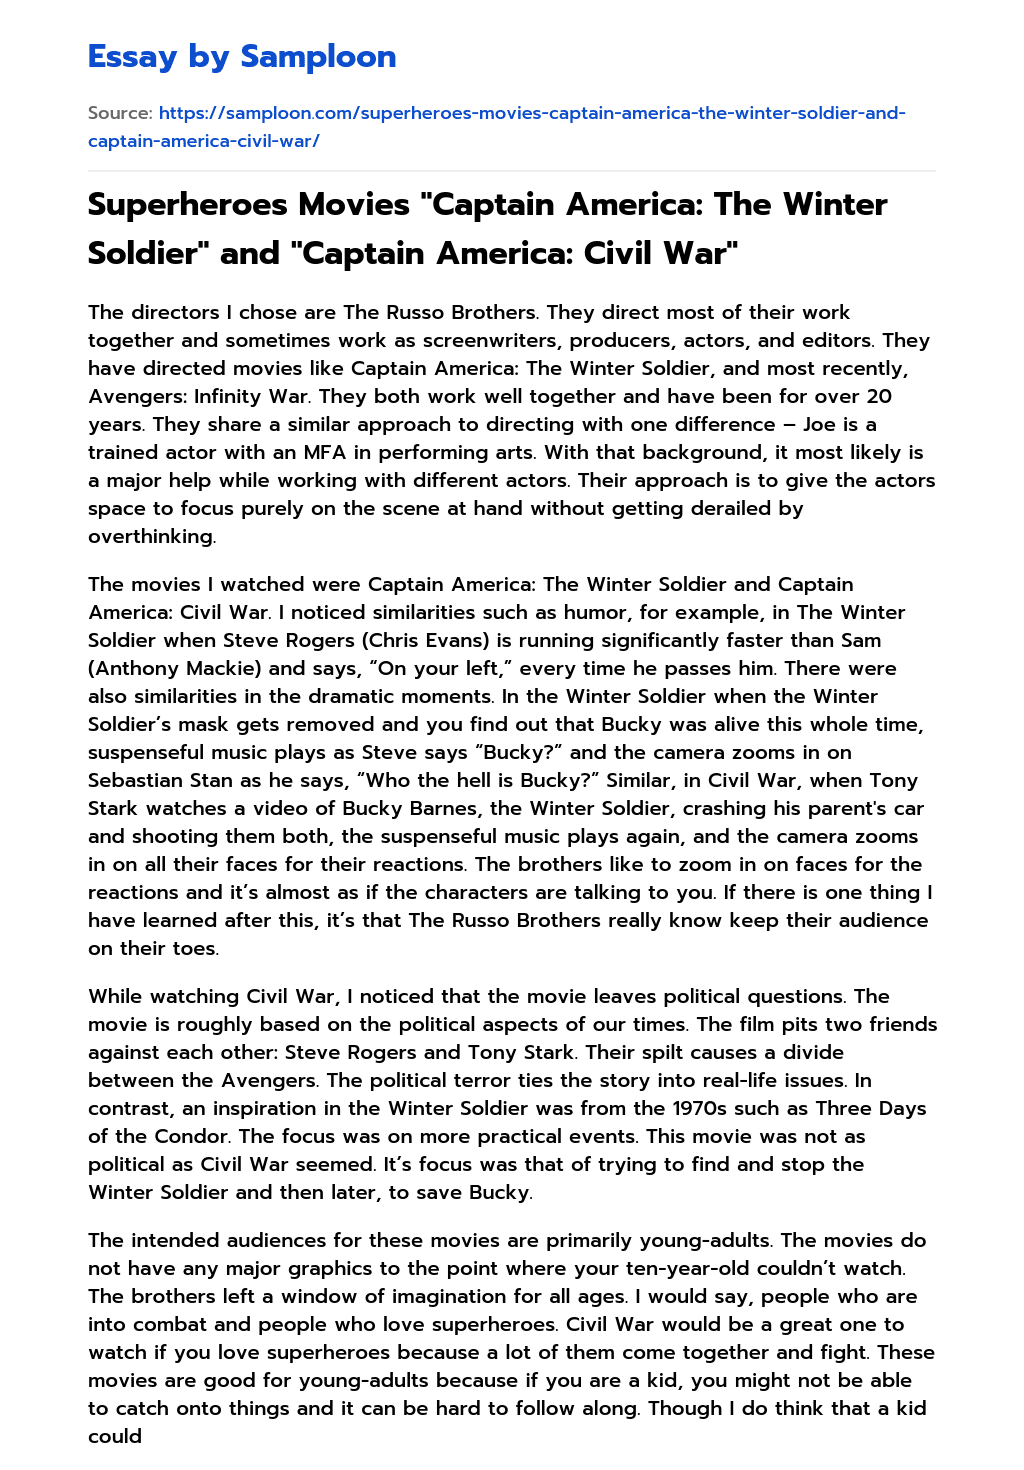 Superheroes Movies “Captain America: The Winter Soldier” and “Captain America: Civil War” essay